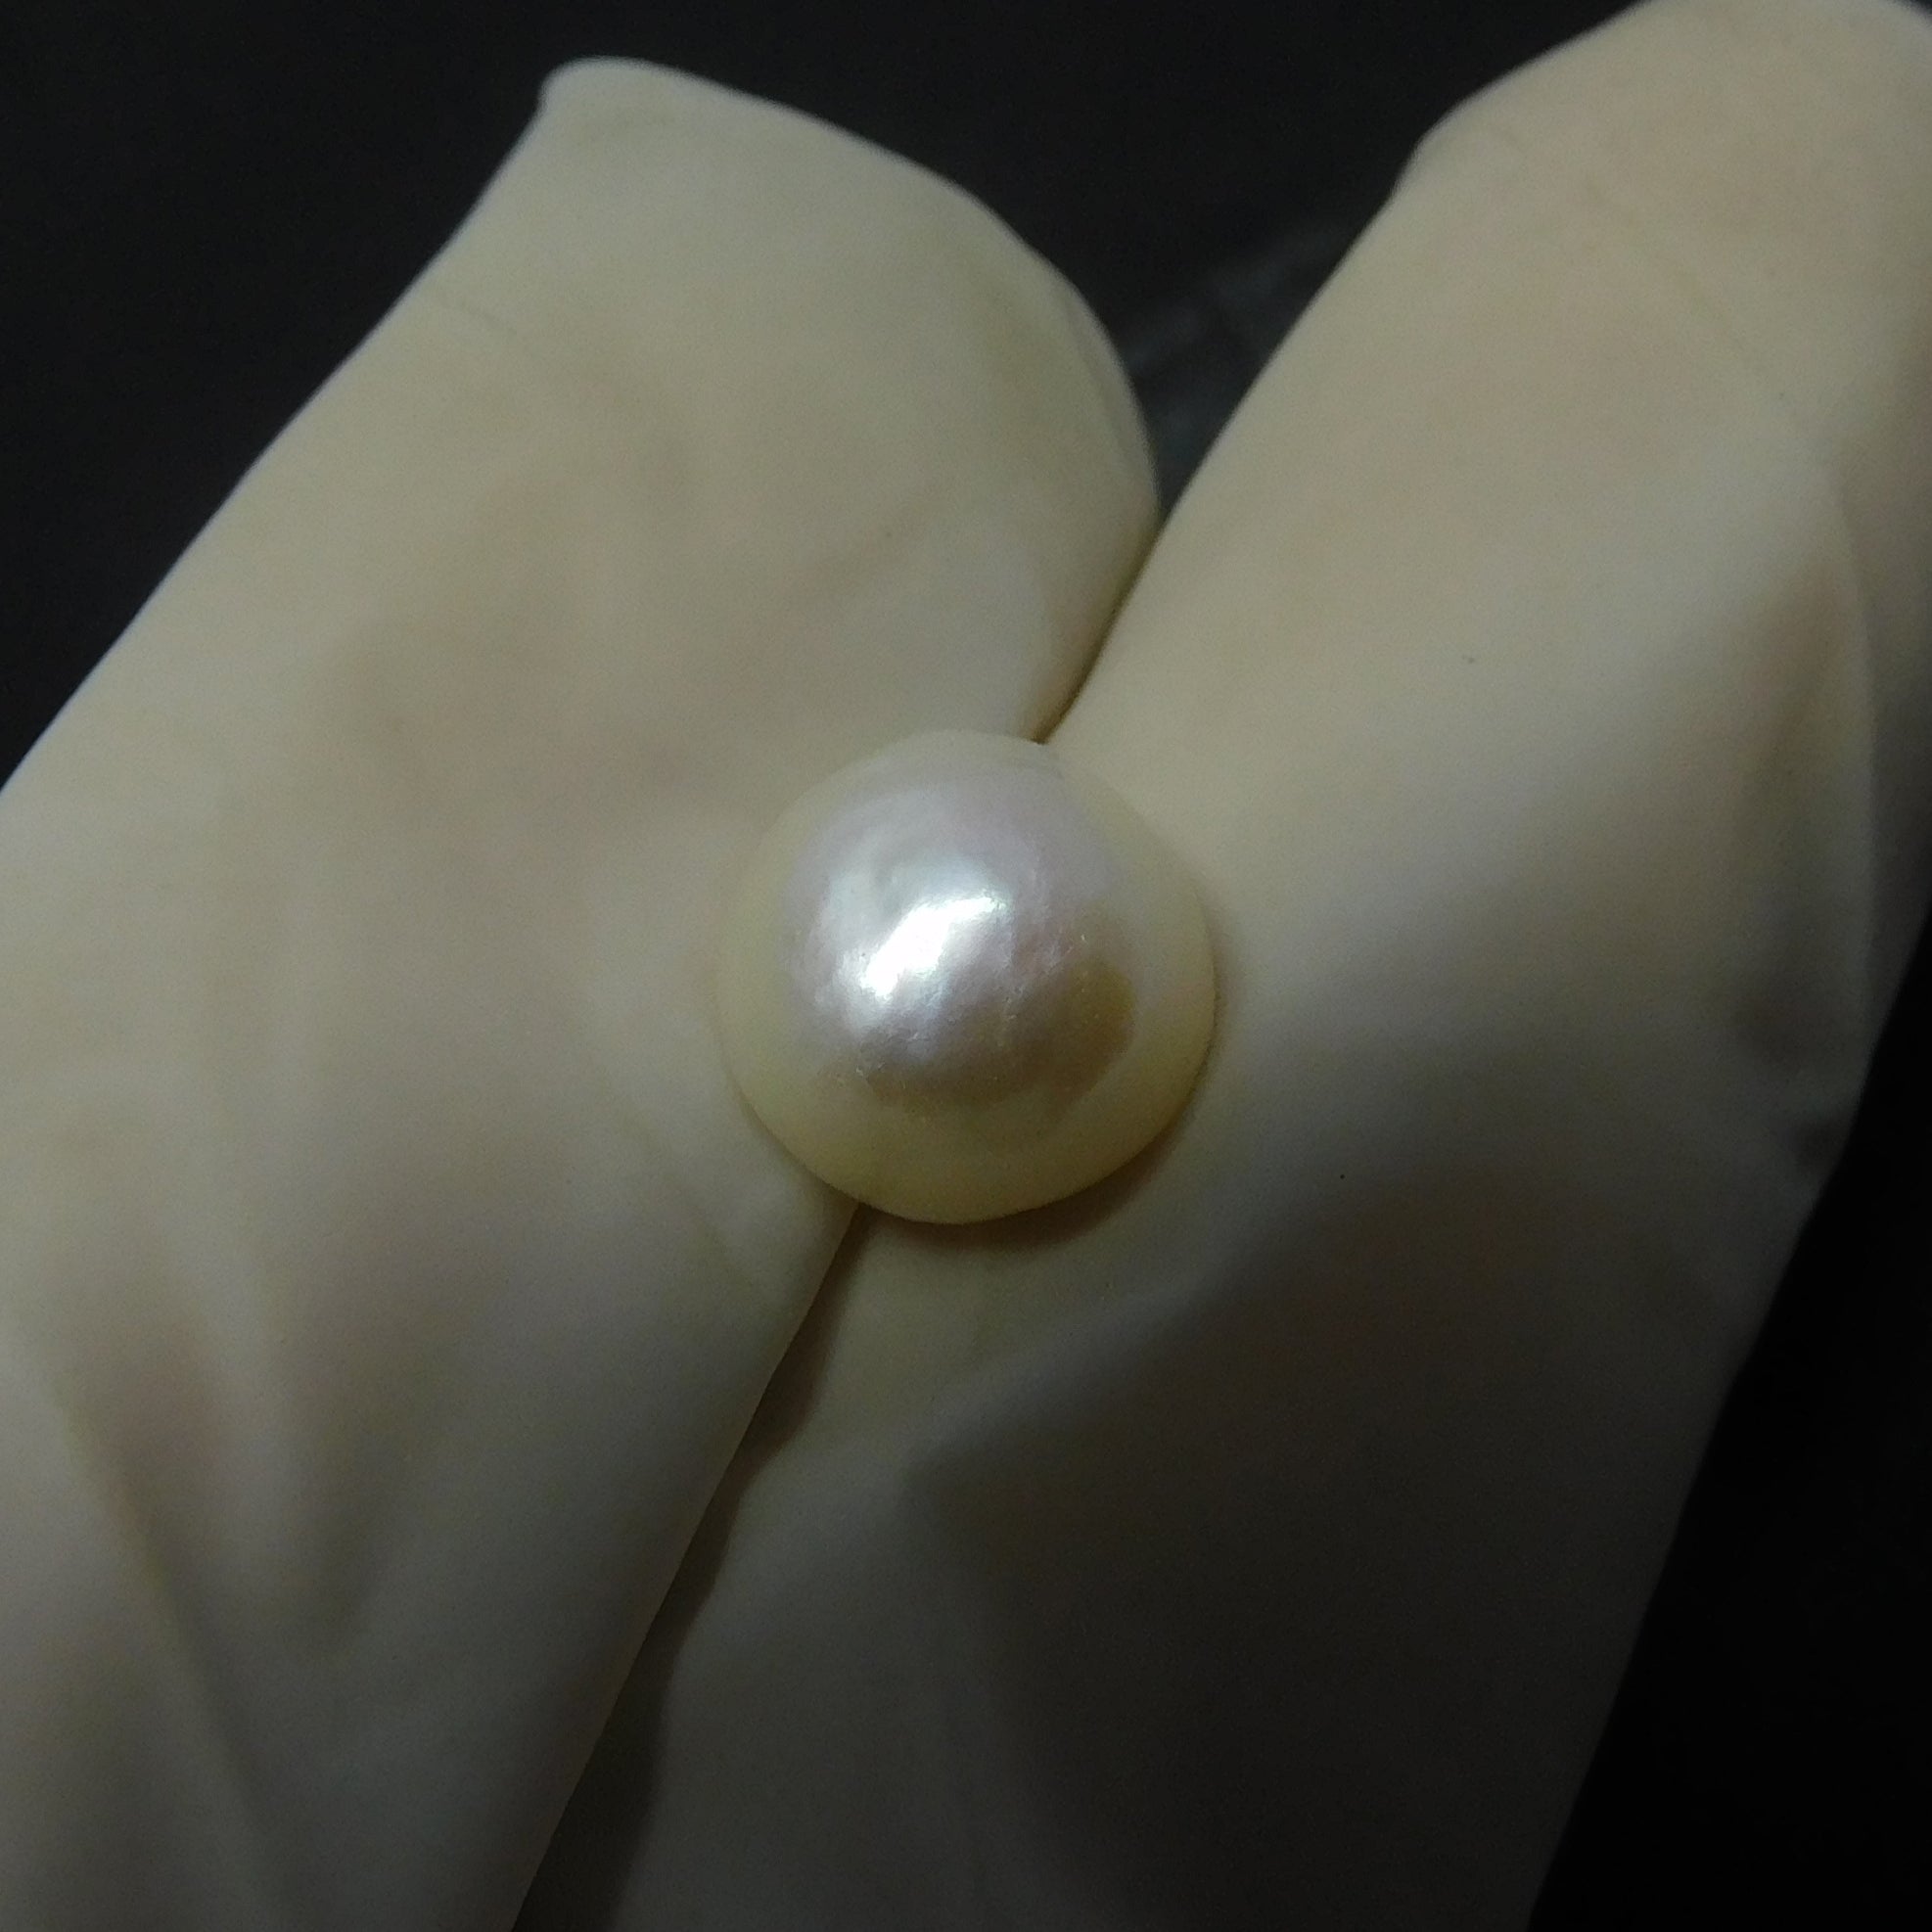 SEA White Color Pearl ! Biwa Pearls | 3.25 Carat Natural Round Shape Certified Loose Gemstone Variety Of Colors Pearl